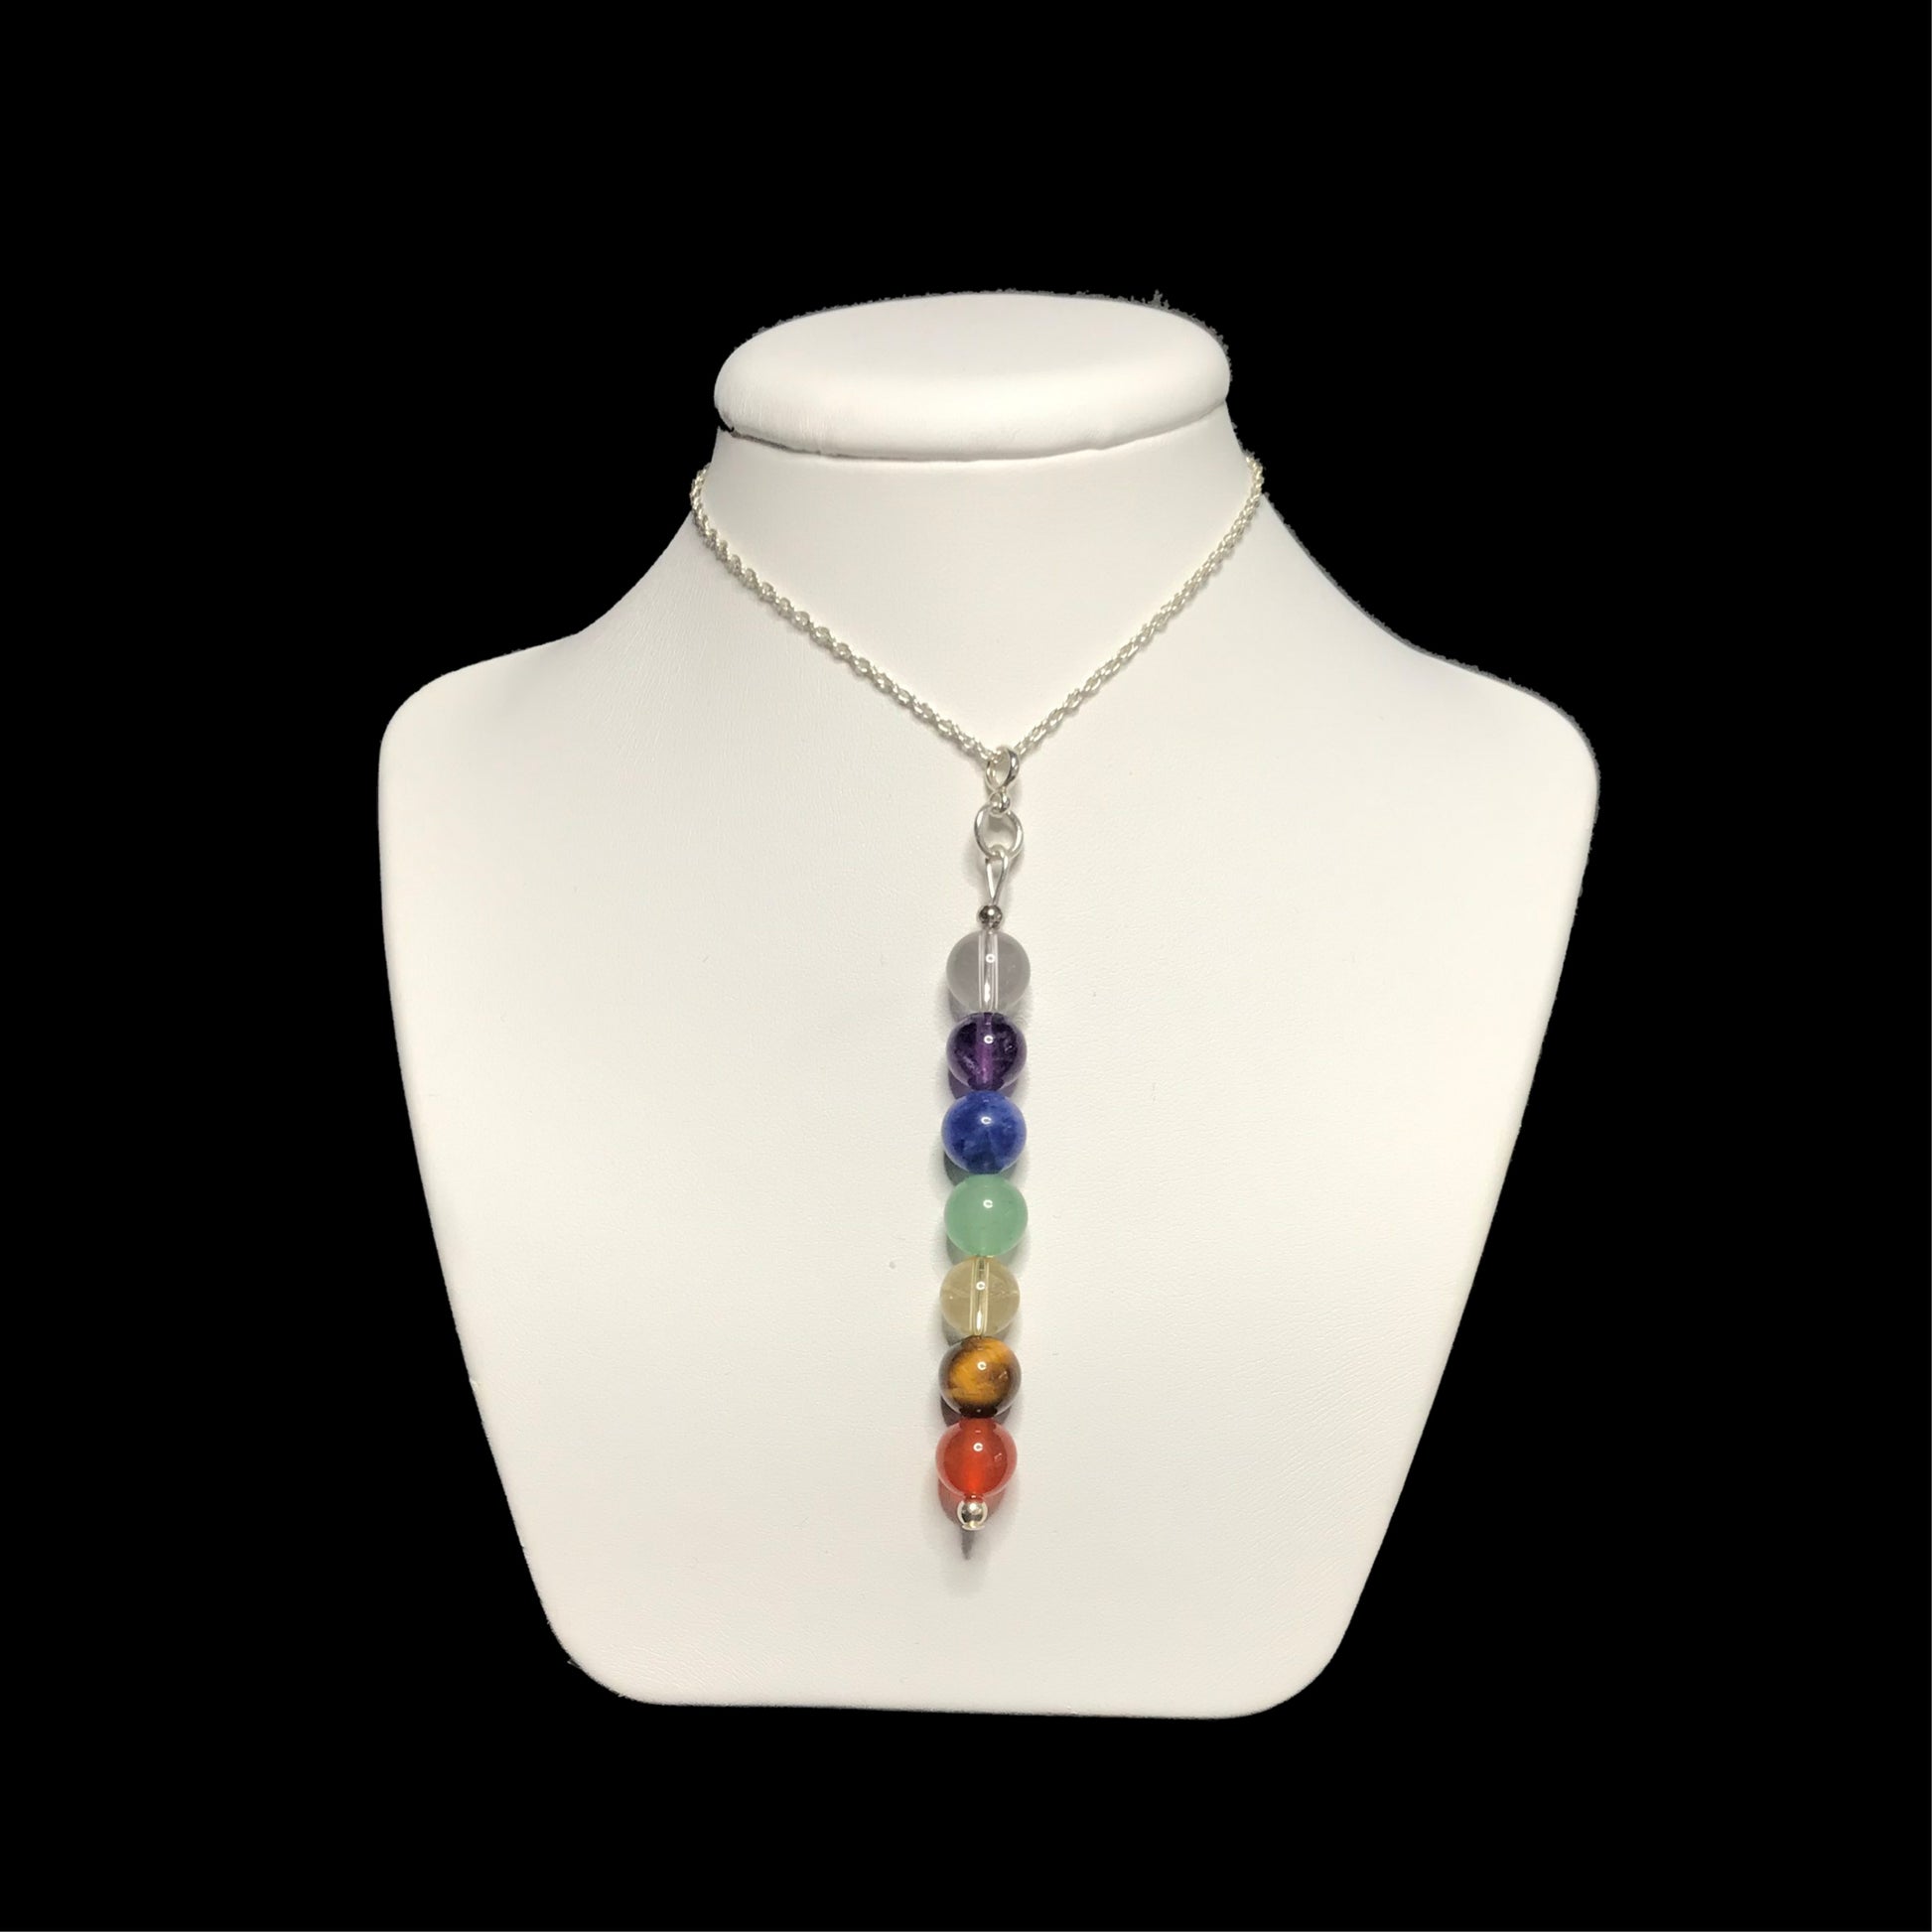 Chakra crystal pendant necklace on stand